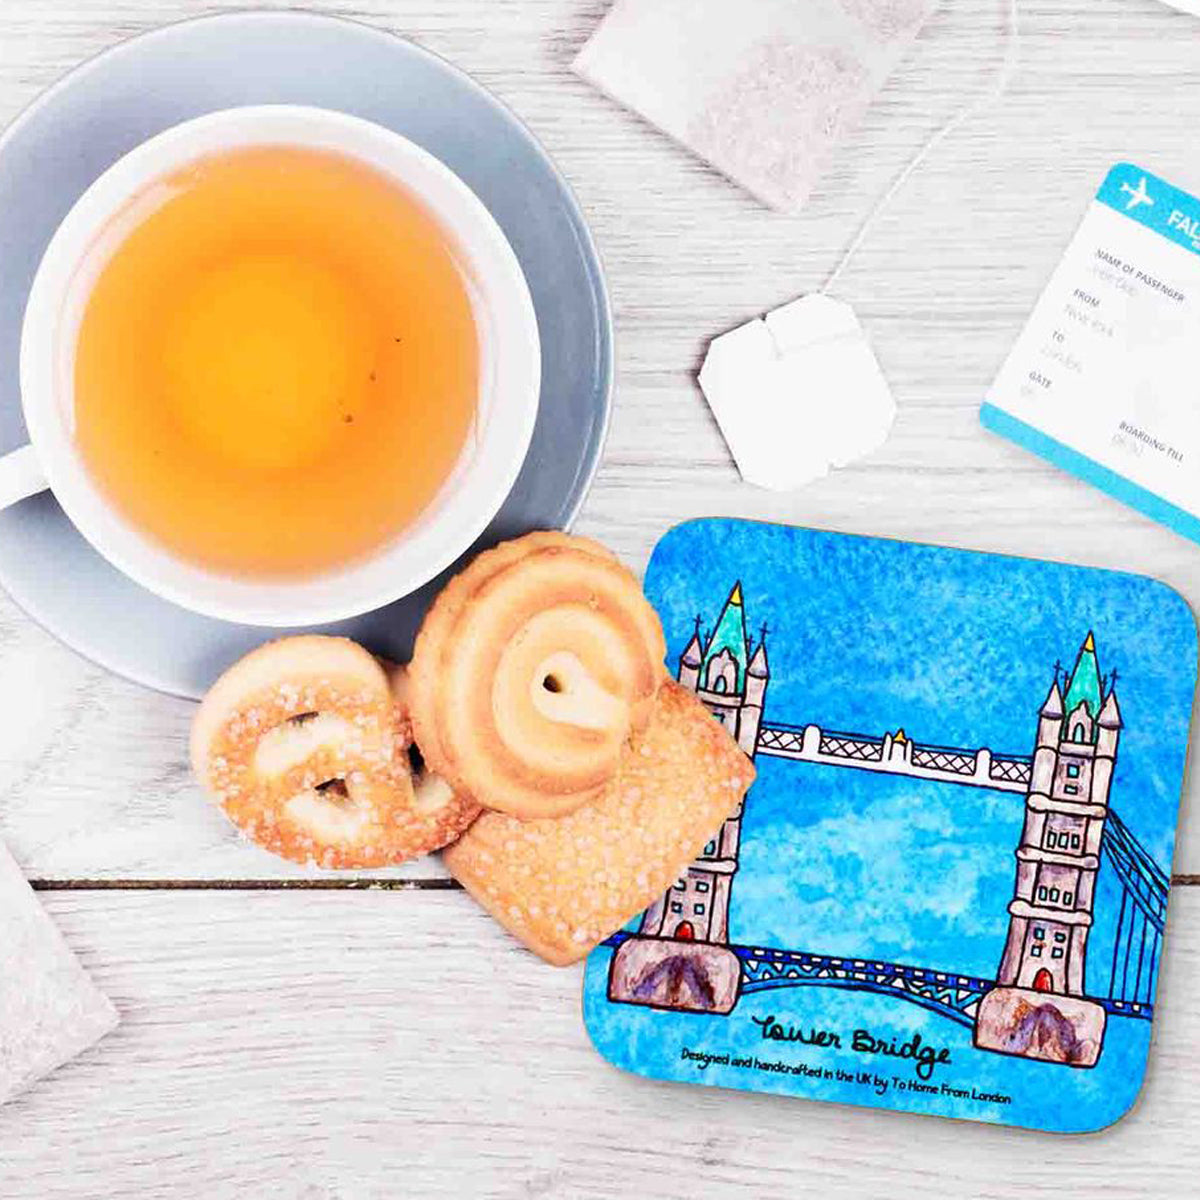 To Home From London Magnetic Coaster - Tower Bridge